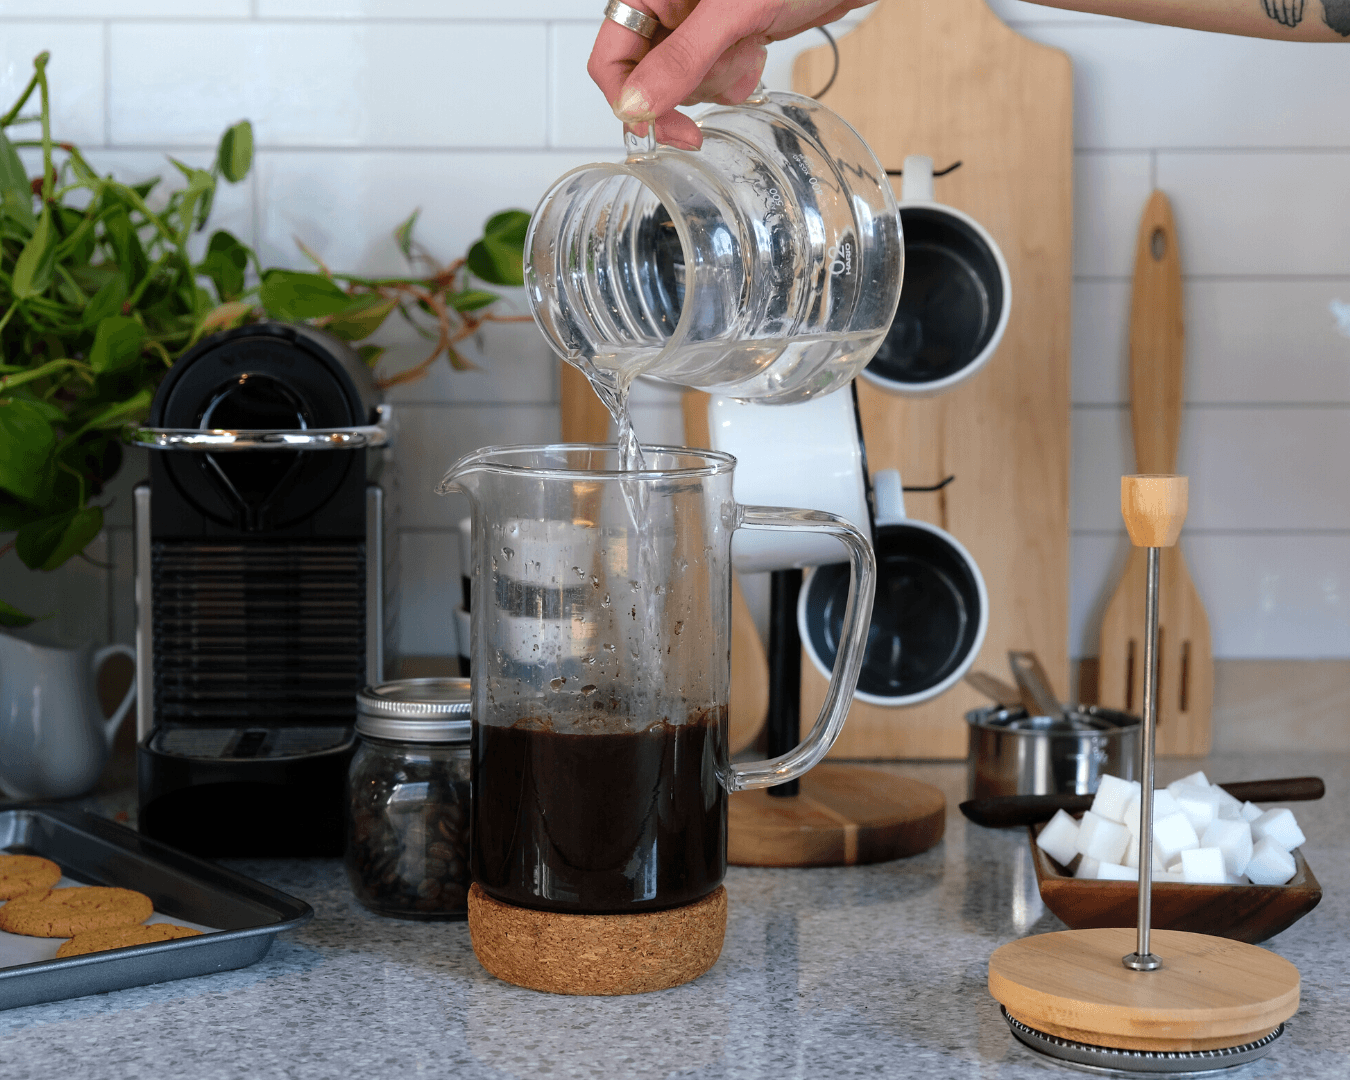 Making cold brew coffee in a French press is a good way to reduce the acidity of your coffee